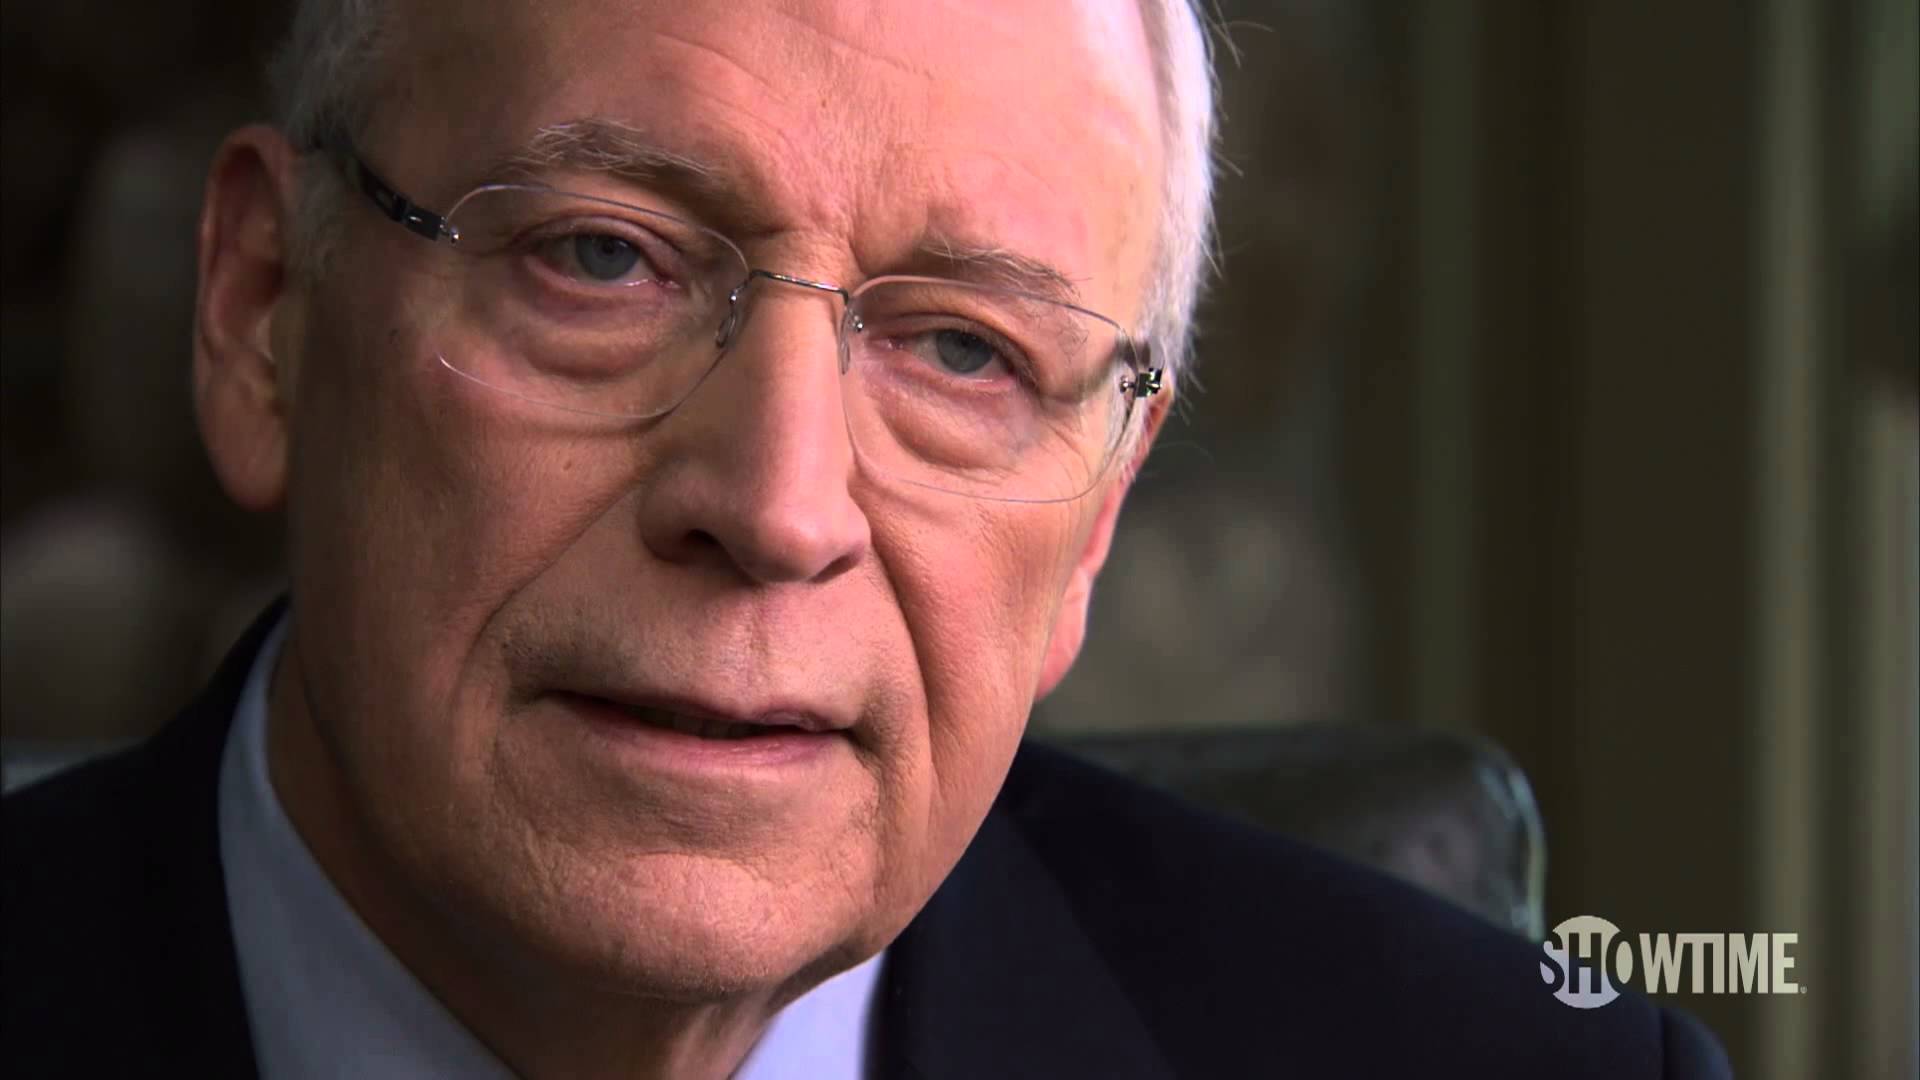 Dick cheney showtime documentary